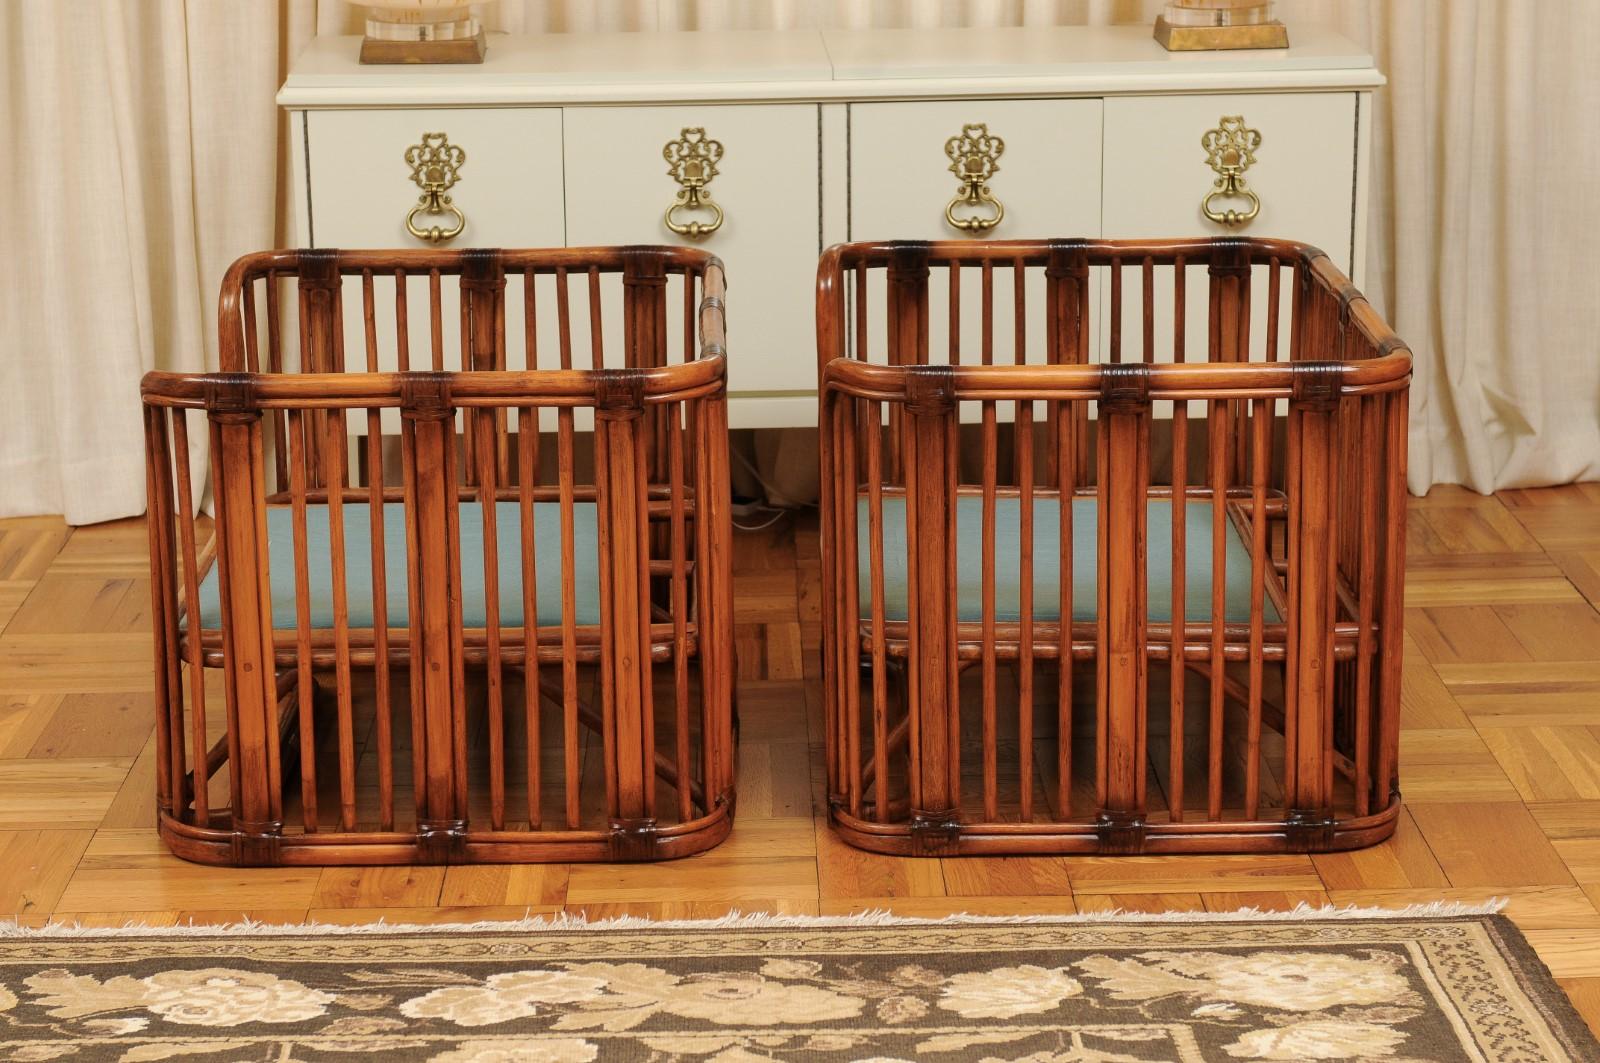 Incredible Pair of Large Scale Rattan Cube Loungers by Brown Jordan, circa 1980 For Sale 5